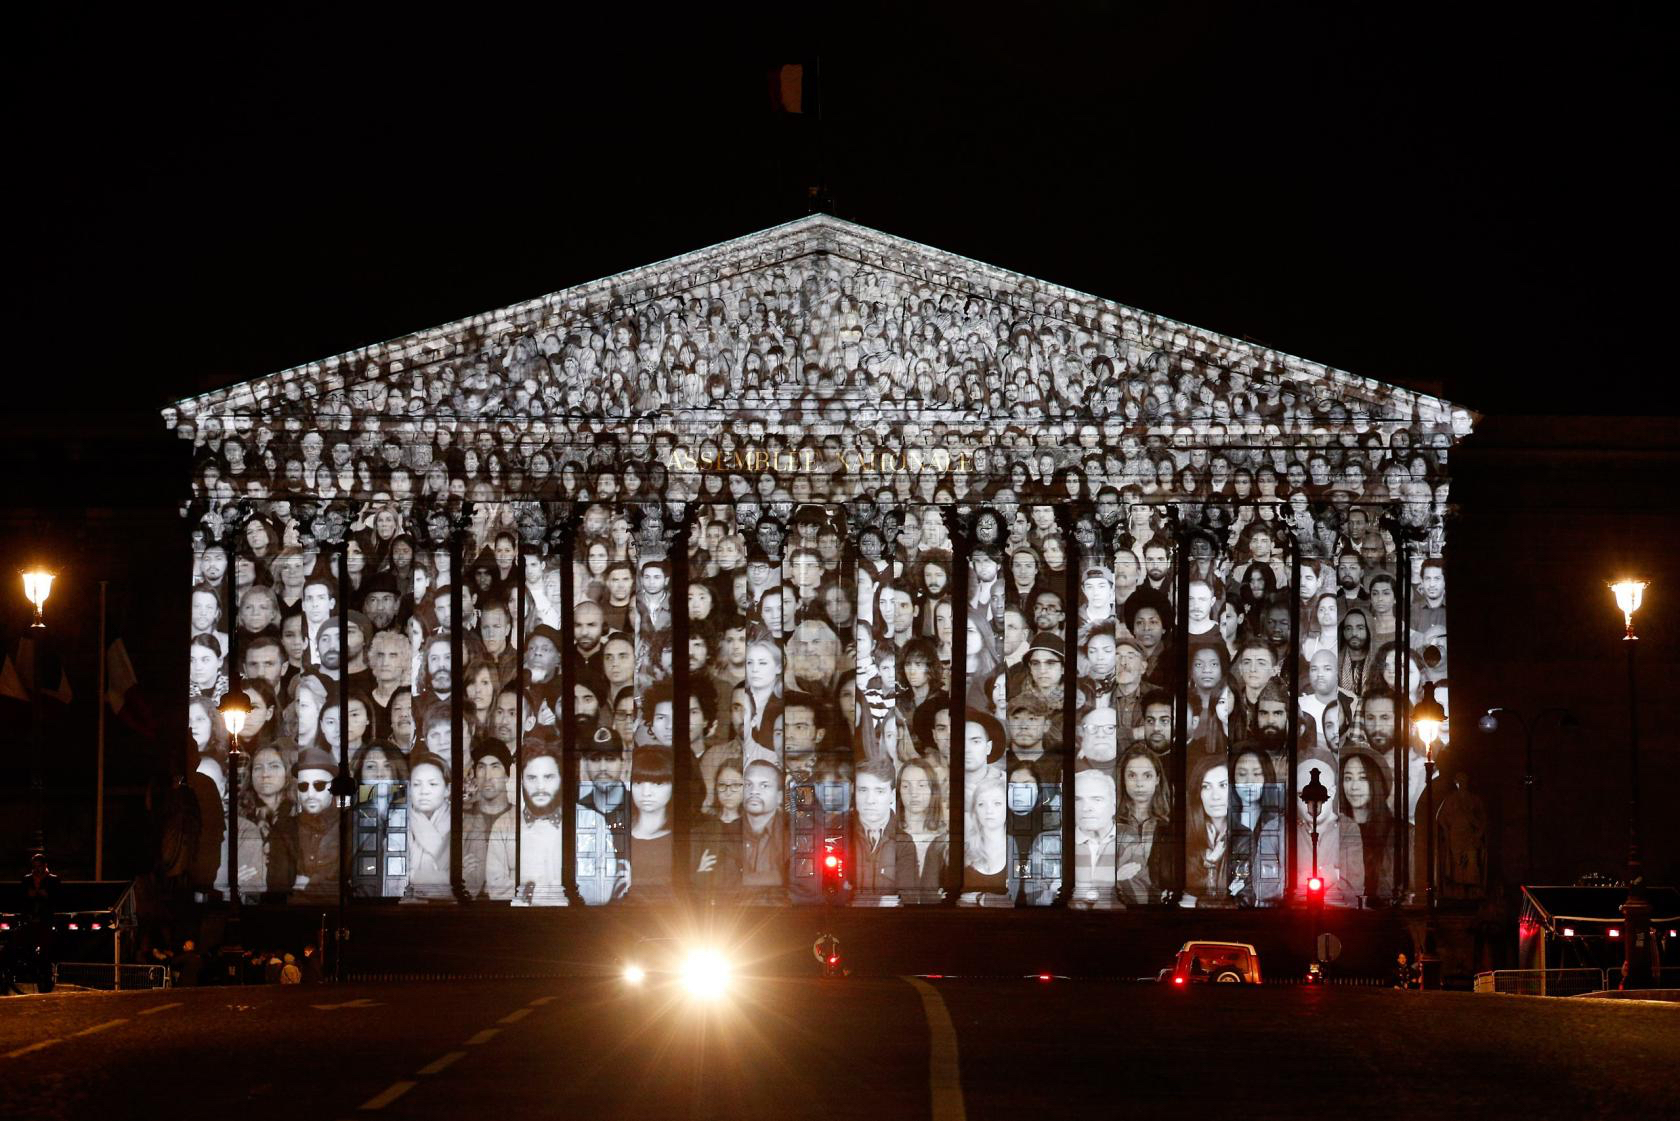 epa05048047 An artwork by French artist JR and US filmmaker Darren Aronofsky is projected onto the French National assembly (Parliament) on the eve of the COP21 climate conference in Paris, France, 29 November 2015. The 21st Conference of the Parties (COP21) due to be held in Paris from 30 November to 11 December will proceed as planned, despite the terrorist attacks of 13 November. EPA/YOAN VALAT